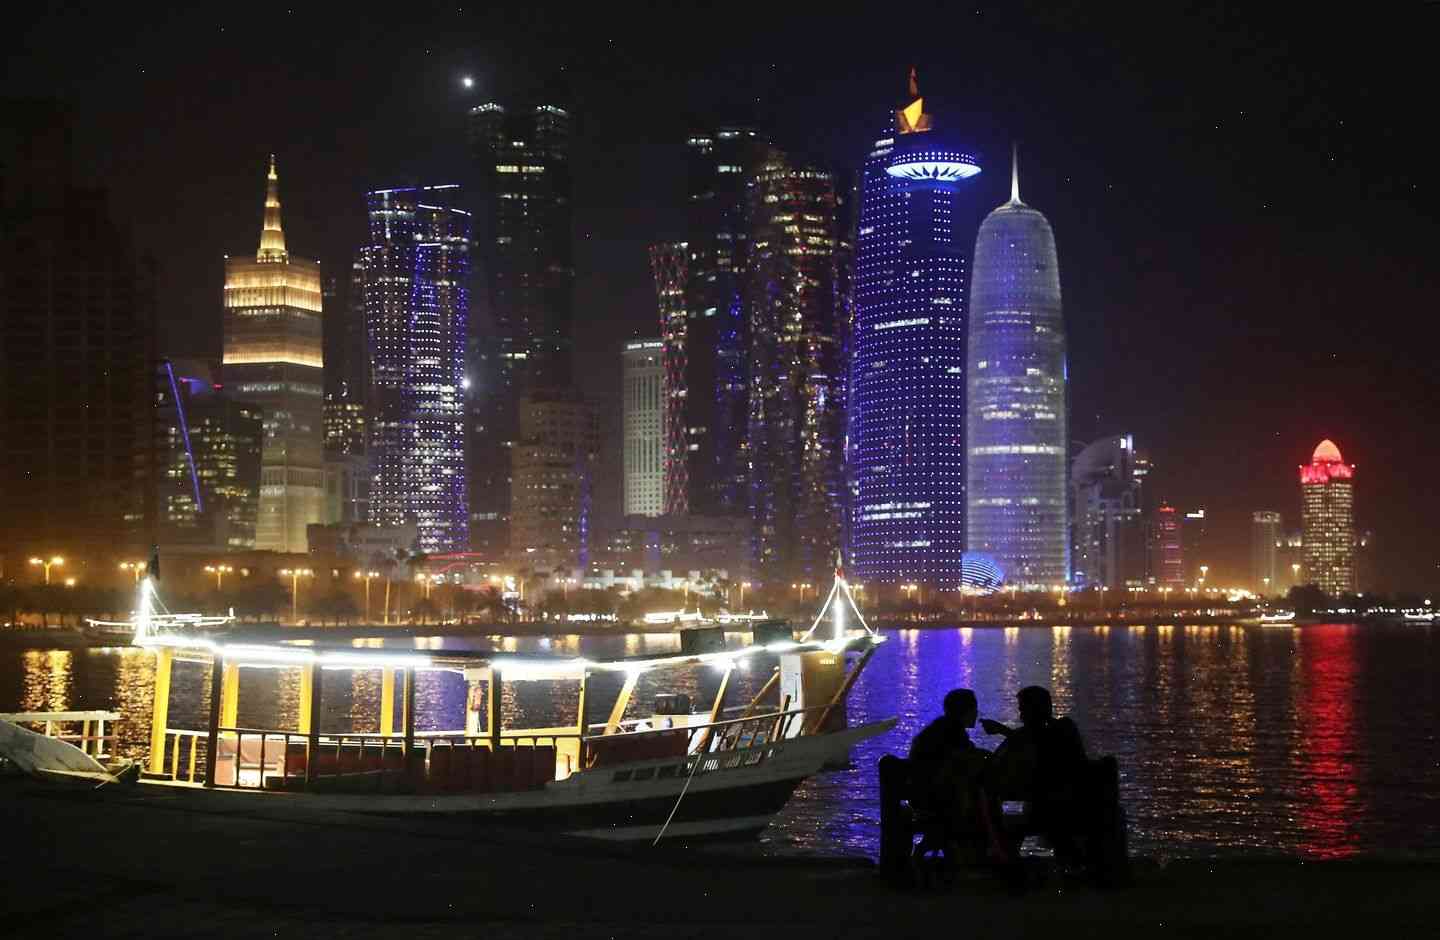 Qatar's billions in infrastructure investment are in jeopardy